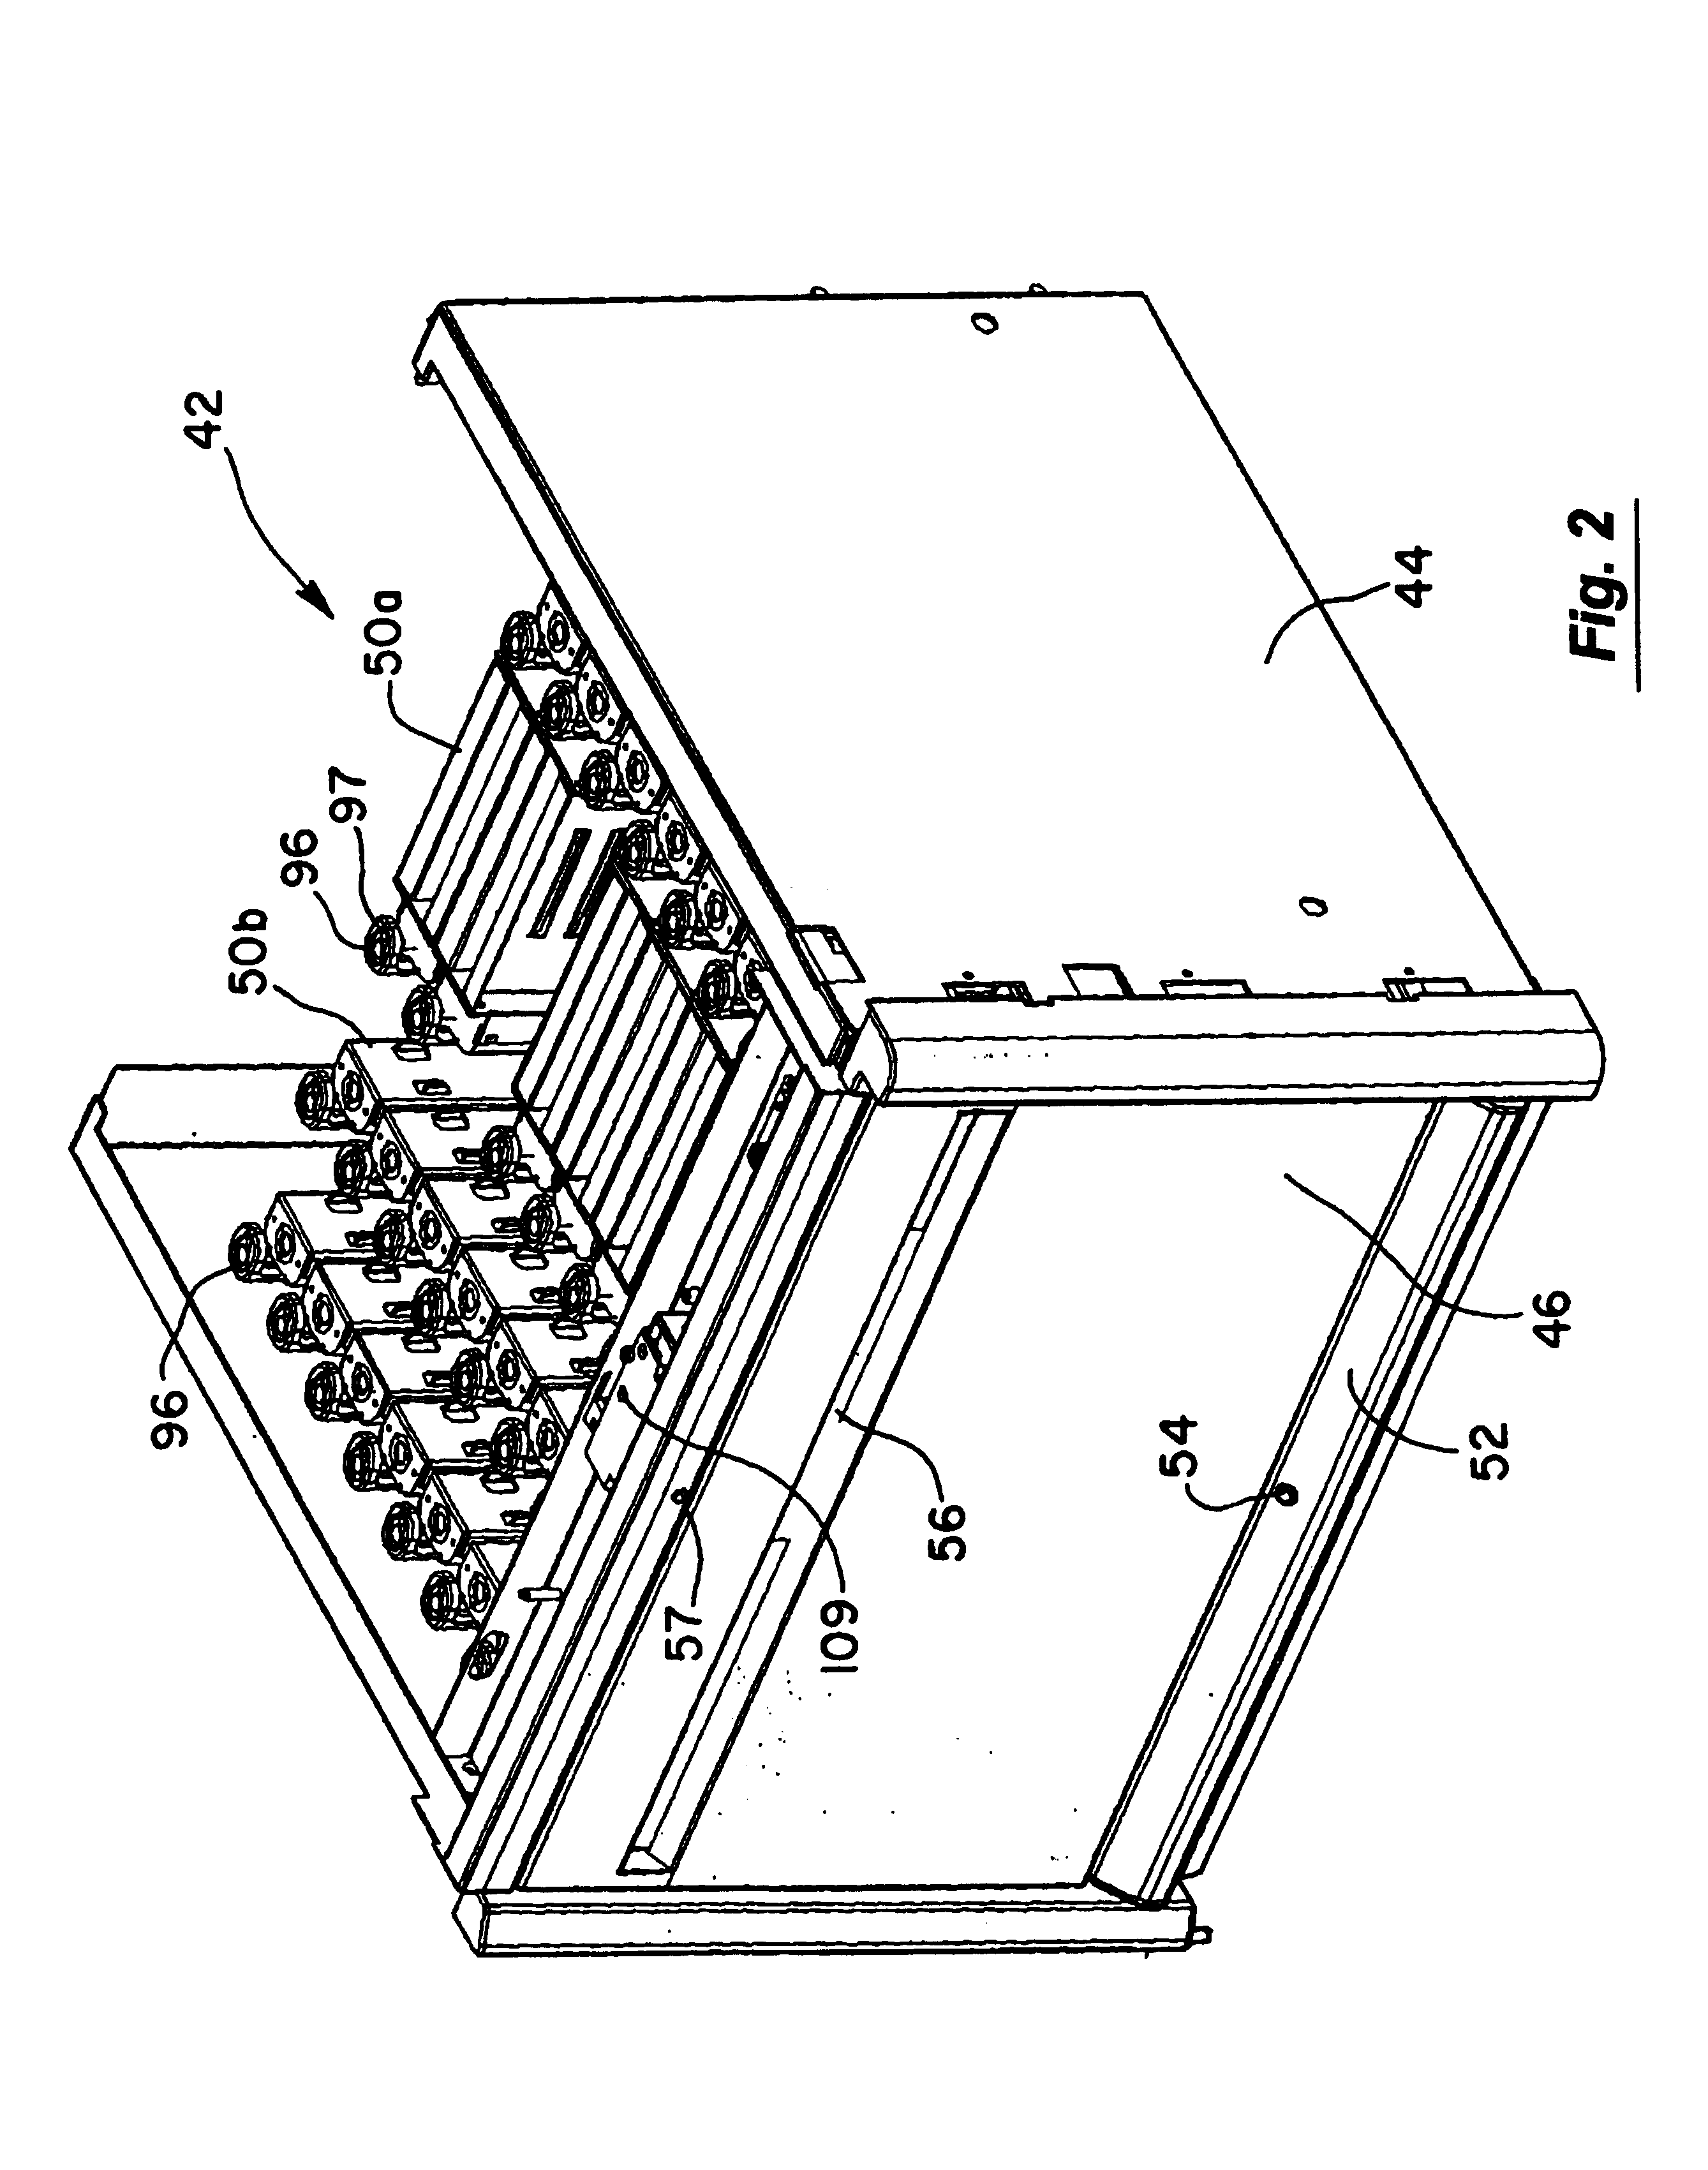 Secured dispensing cabinet and methods